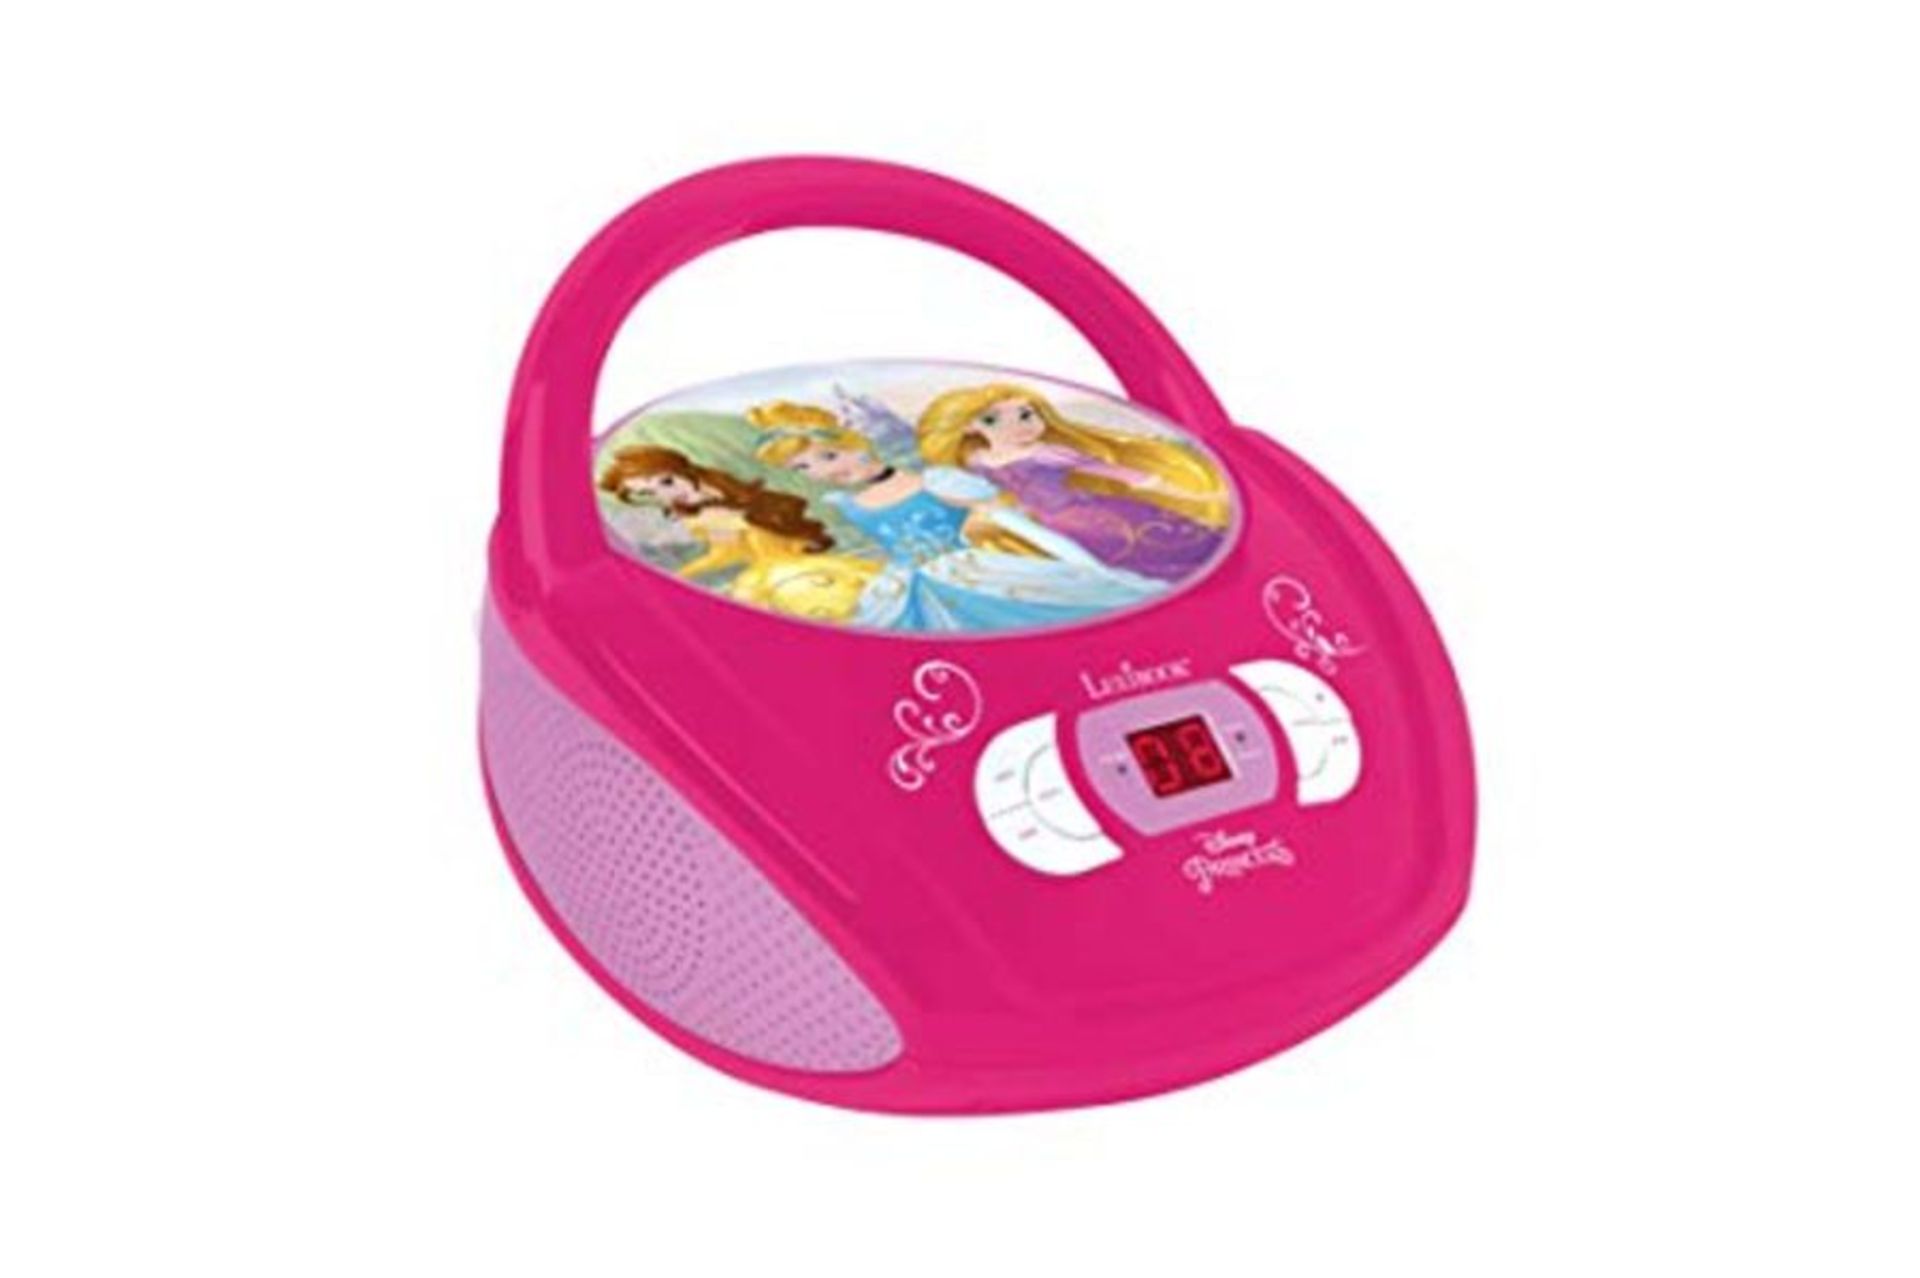 Lexibook Disney Princess CD player, aux-in jack, AC or battery-operated, Pink/White, R